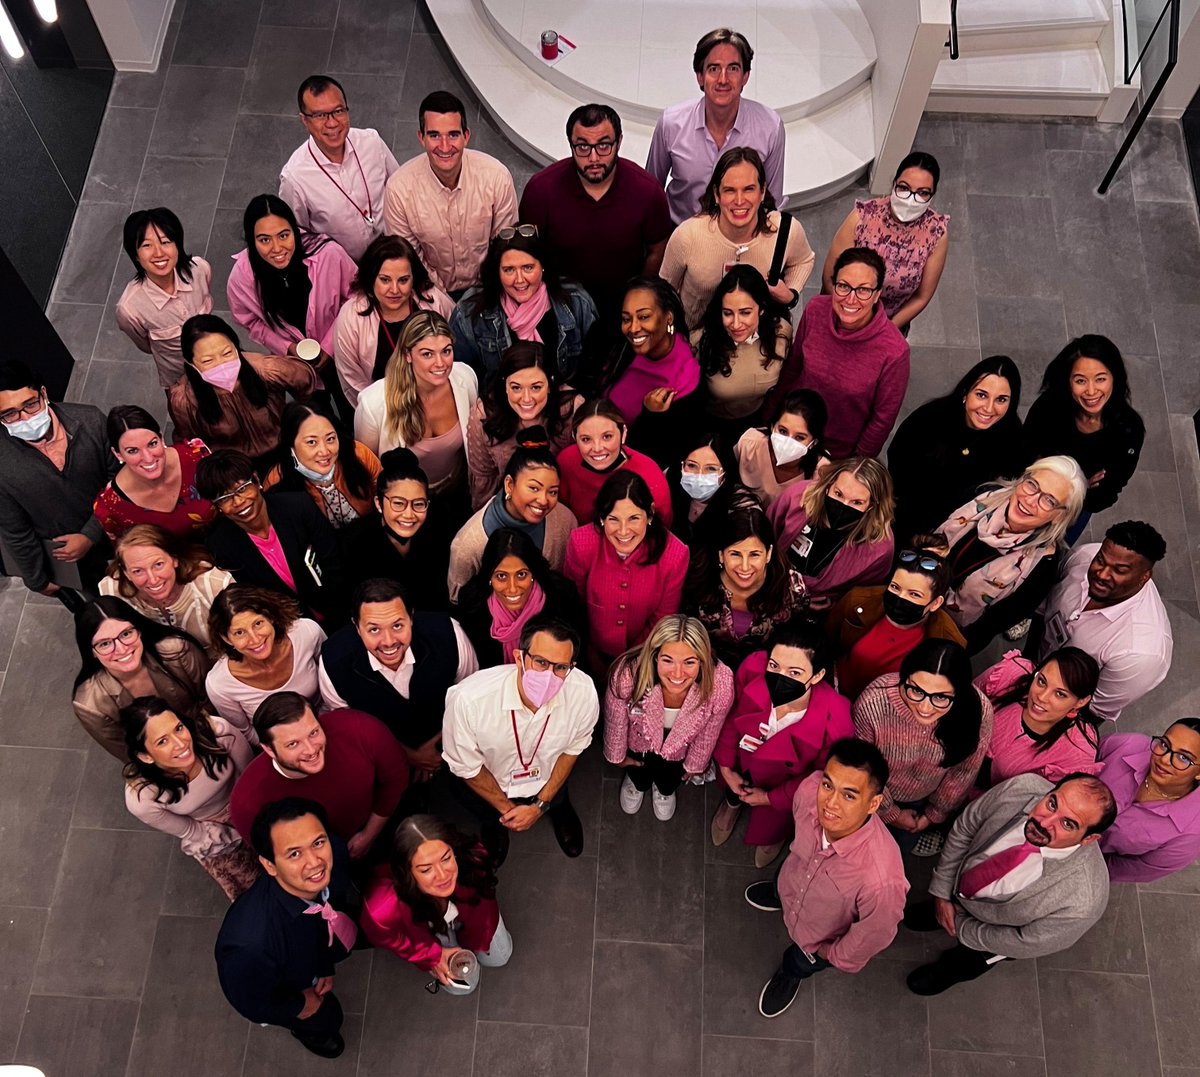 For #NYP’s Office of Marketing & Communications, connecting with the audience means everything. So in honor of #BreastCancer awareness, we #WearPink in solidarity and as allies in the fight against #cancer. 💖